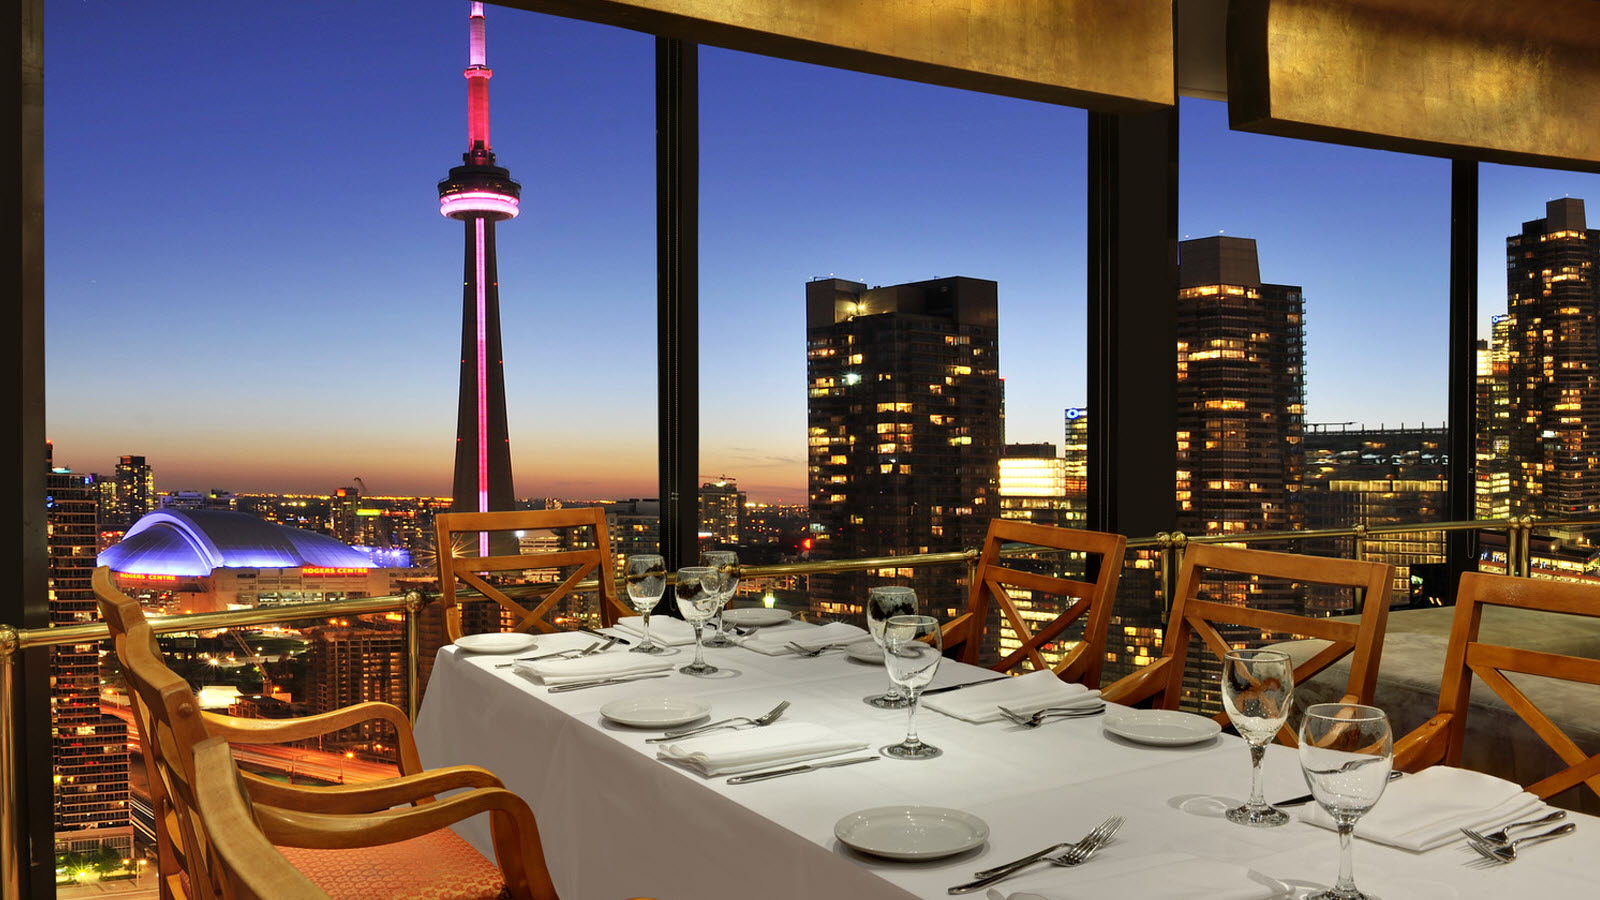 Have you tried these glam restaurants in Toronto?